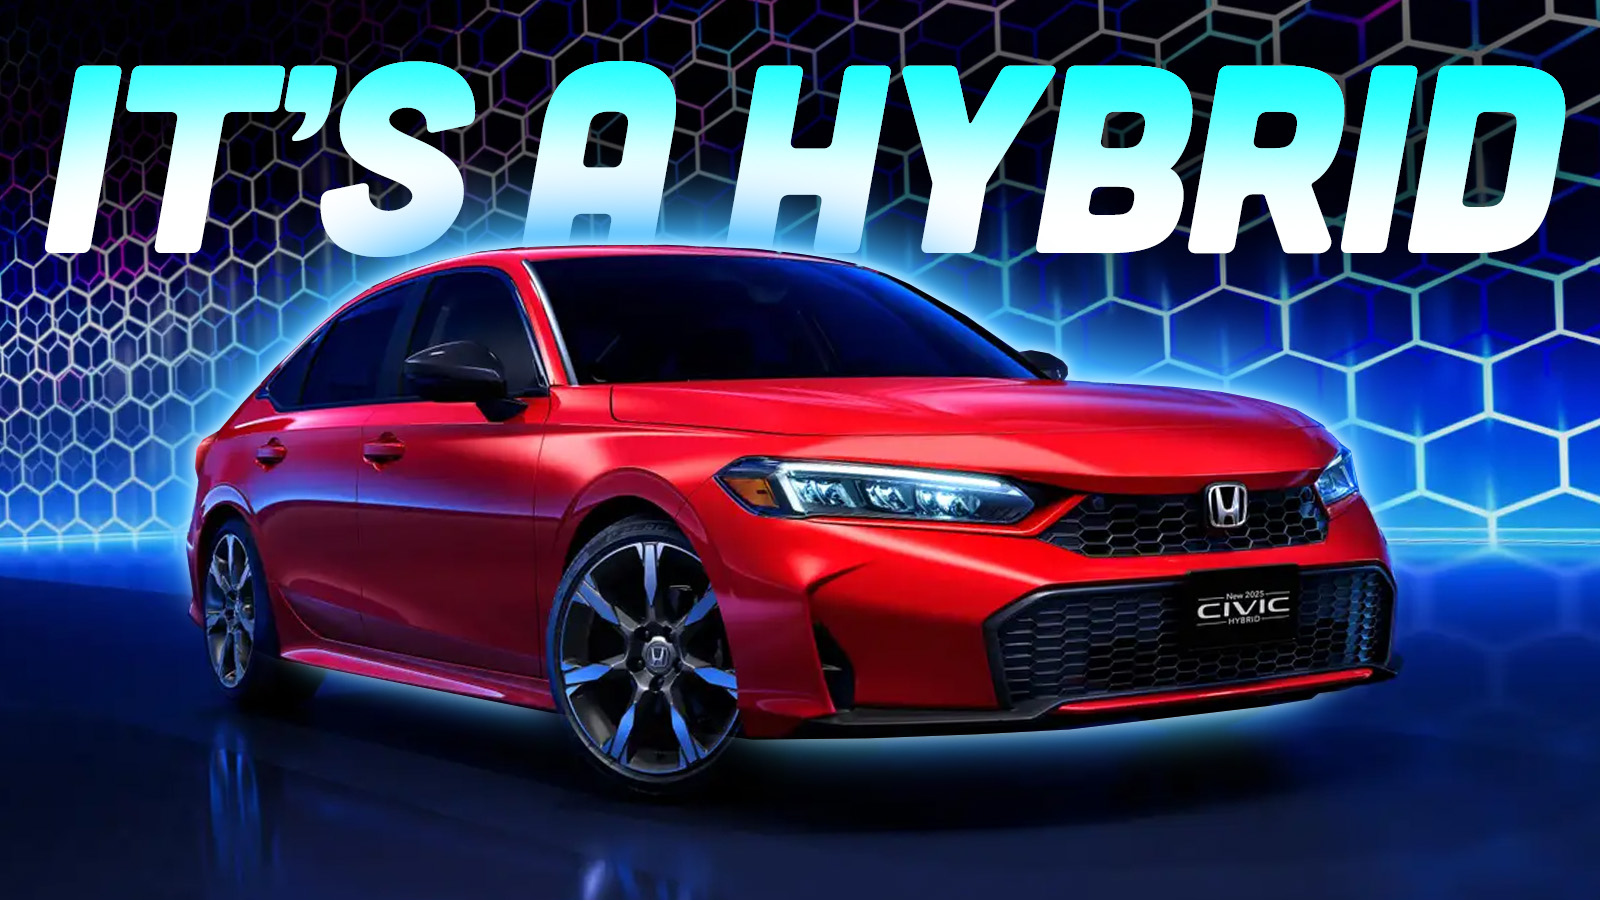 Check Out the Appearance of the 2025 Honda Civic Hybrid.